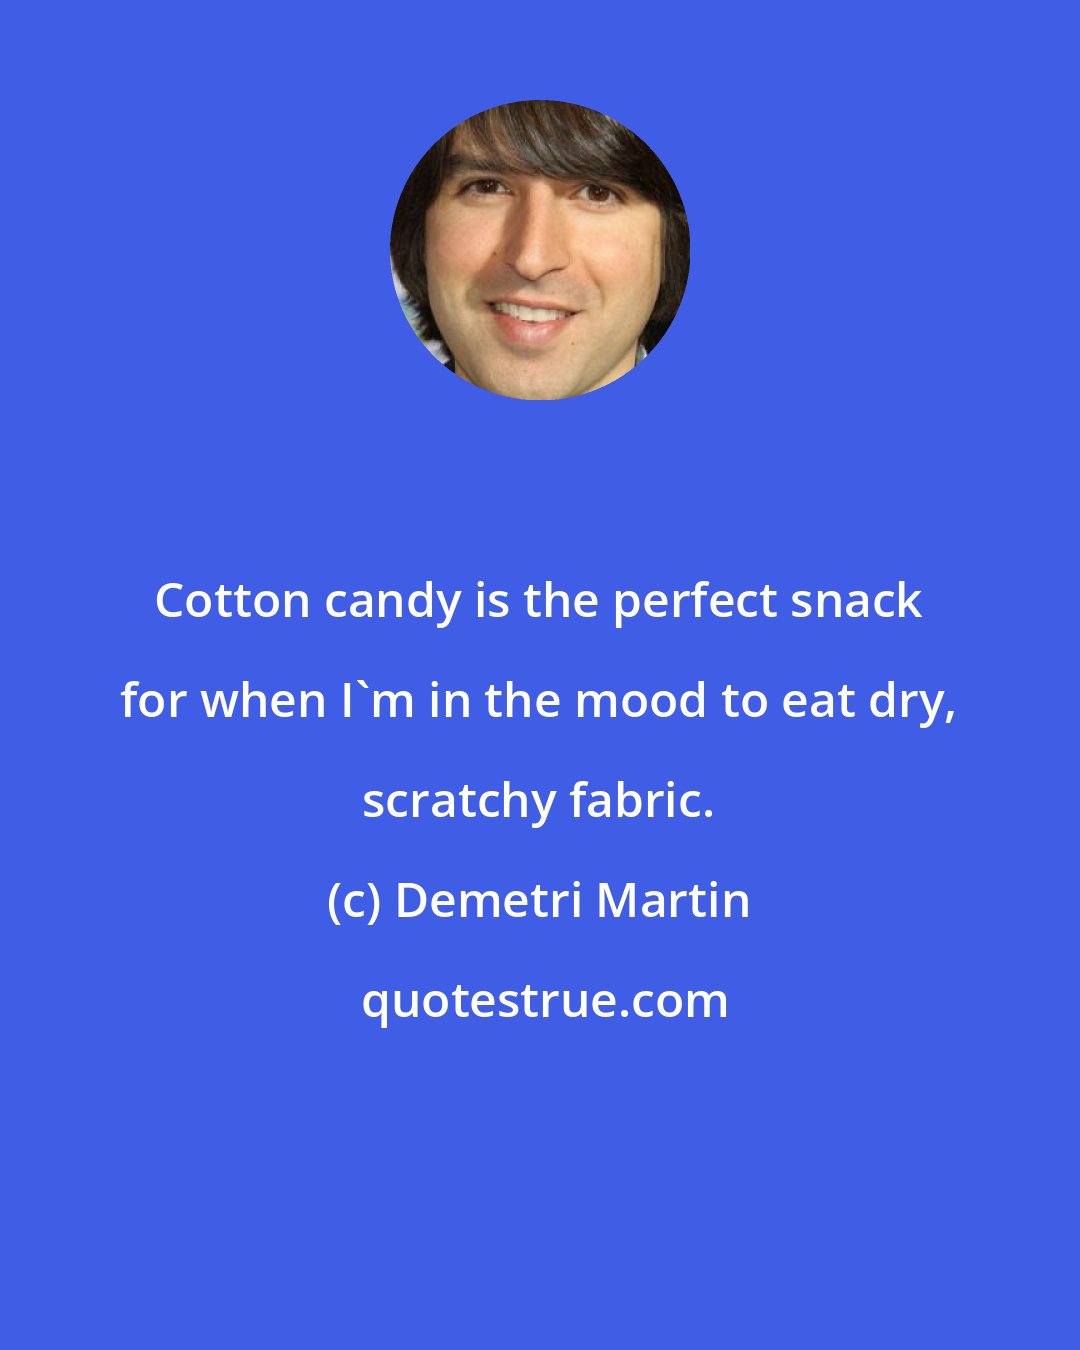 Demetri Martin: Cotton candy is the perfect snack for when I'm in the mood to eat dry, scratchy fabric.